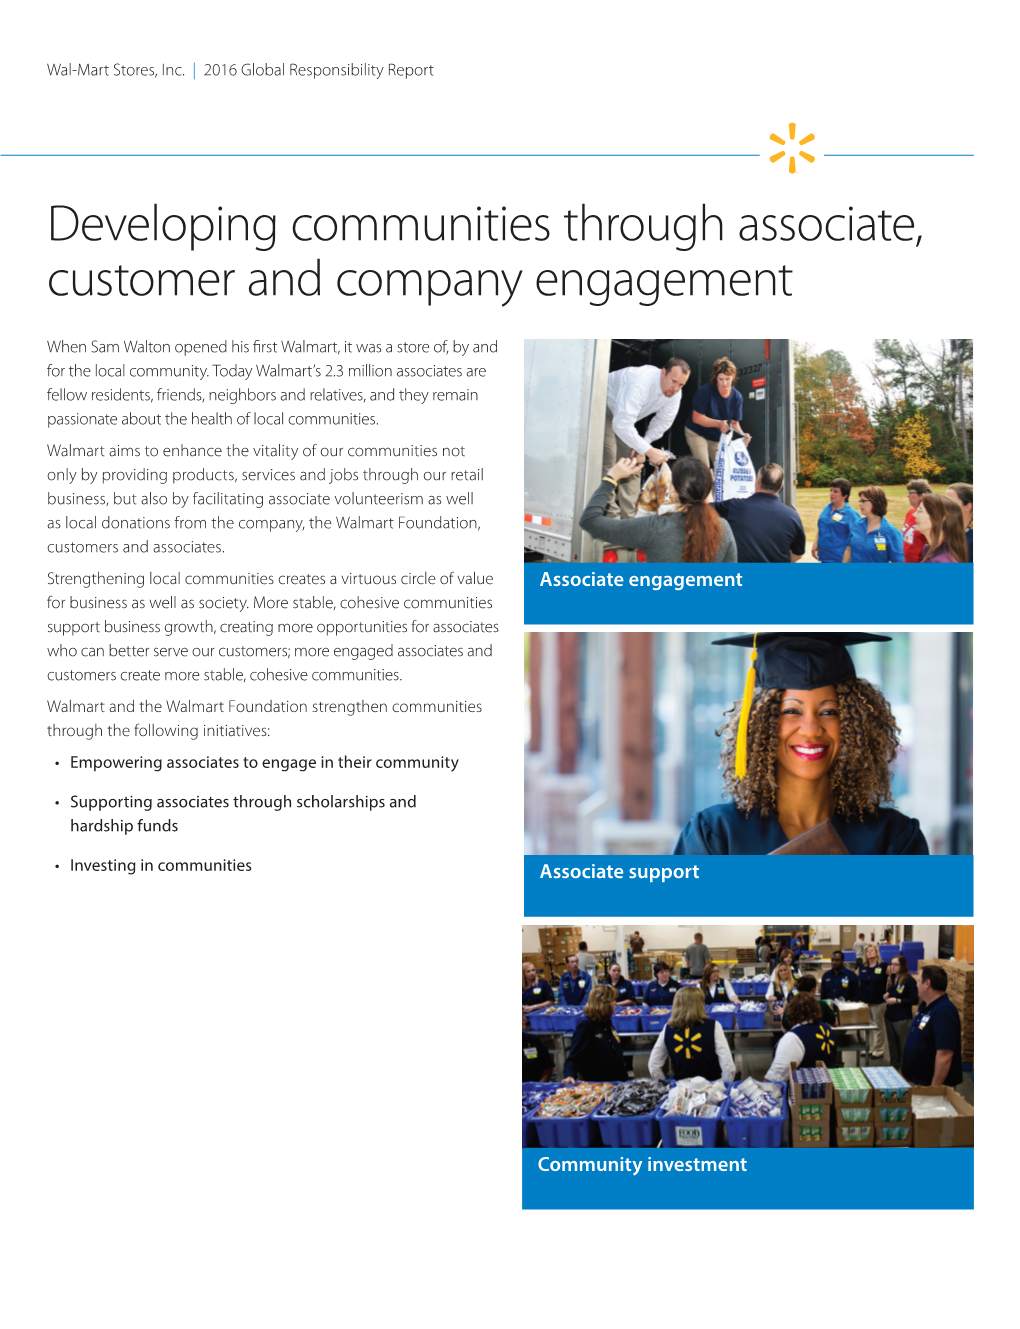 Developing Communities Through Associate, Customer and Company Engagement